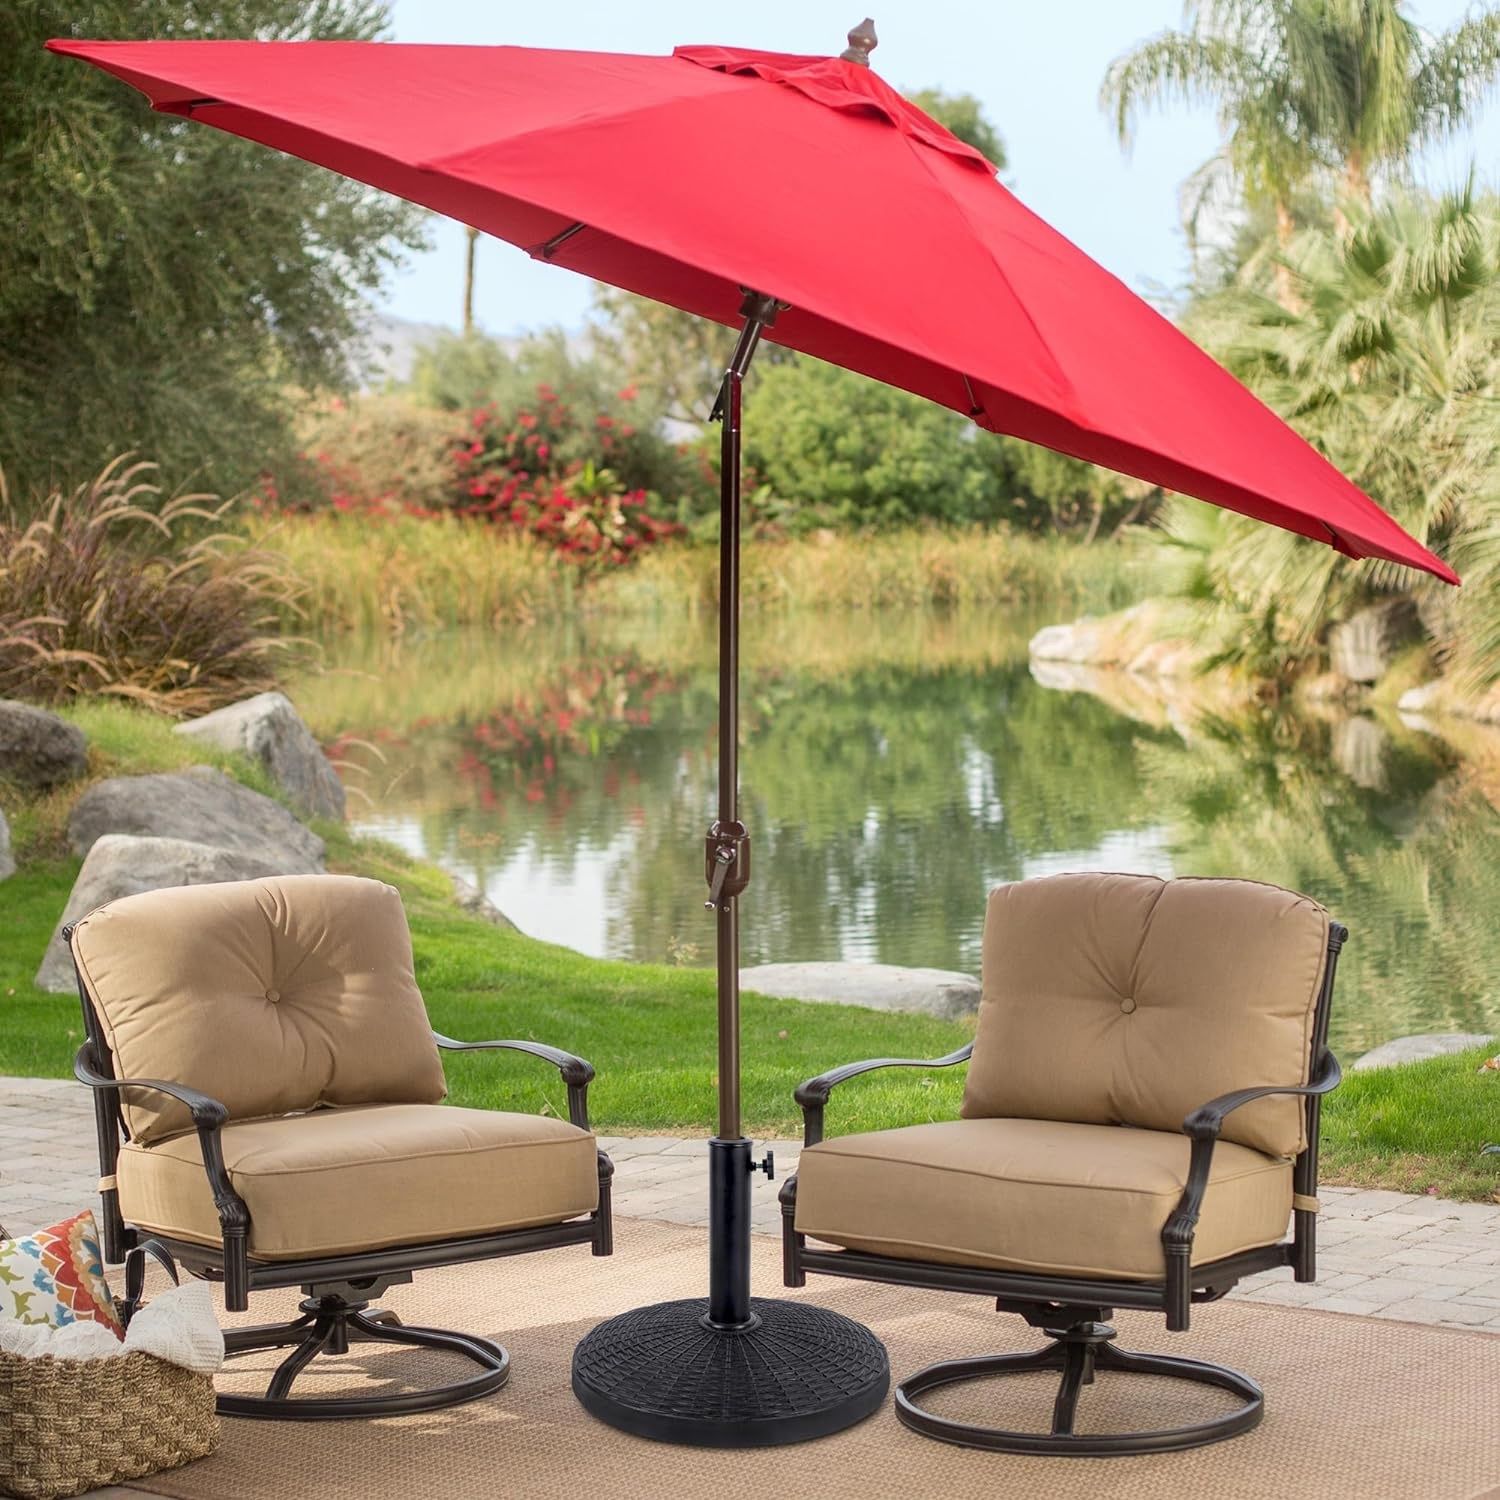 Patio Umbrella With Base Stand